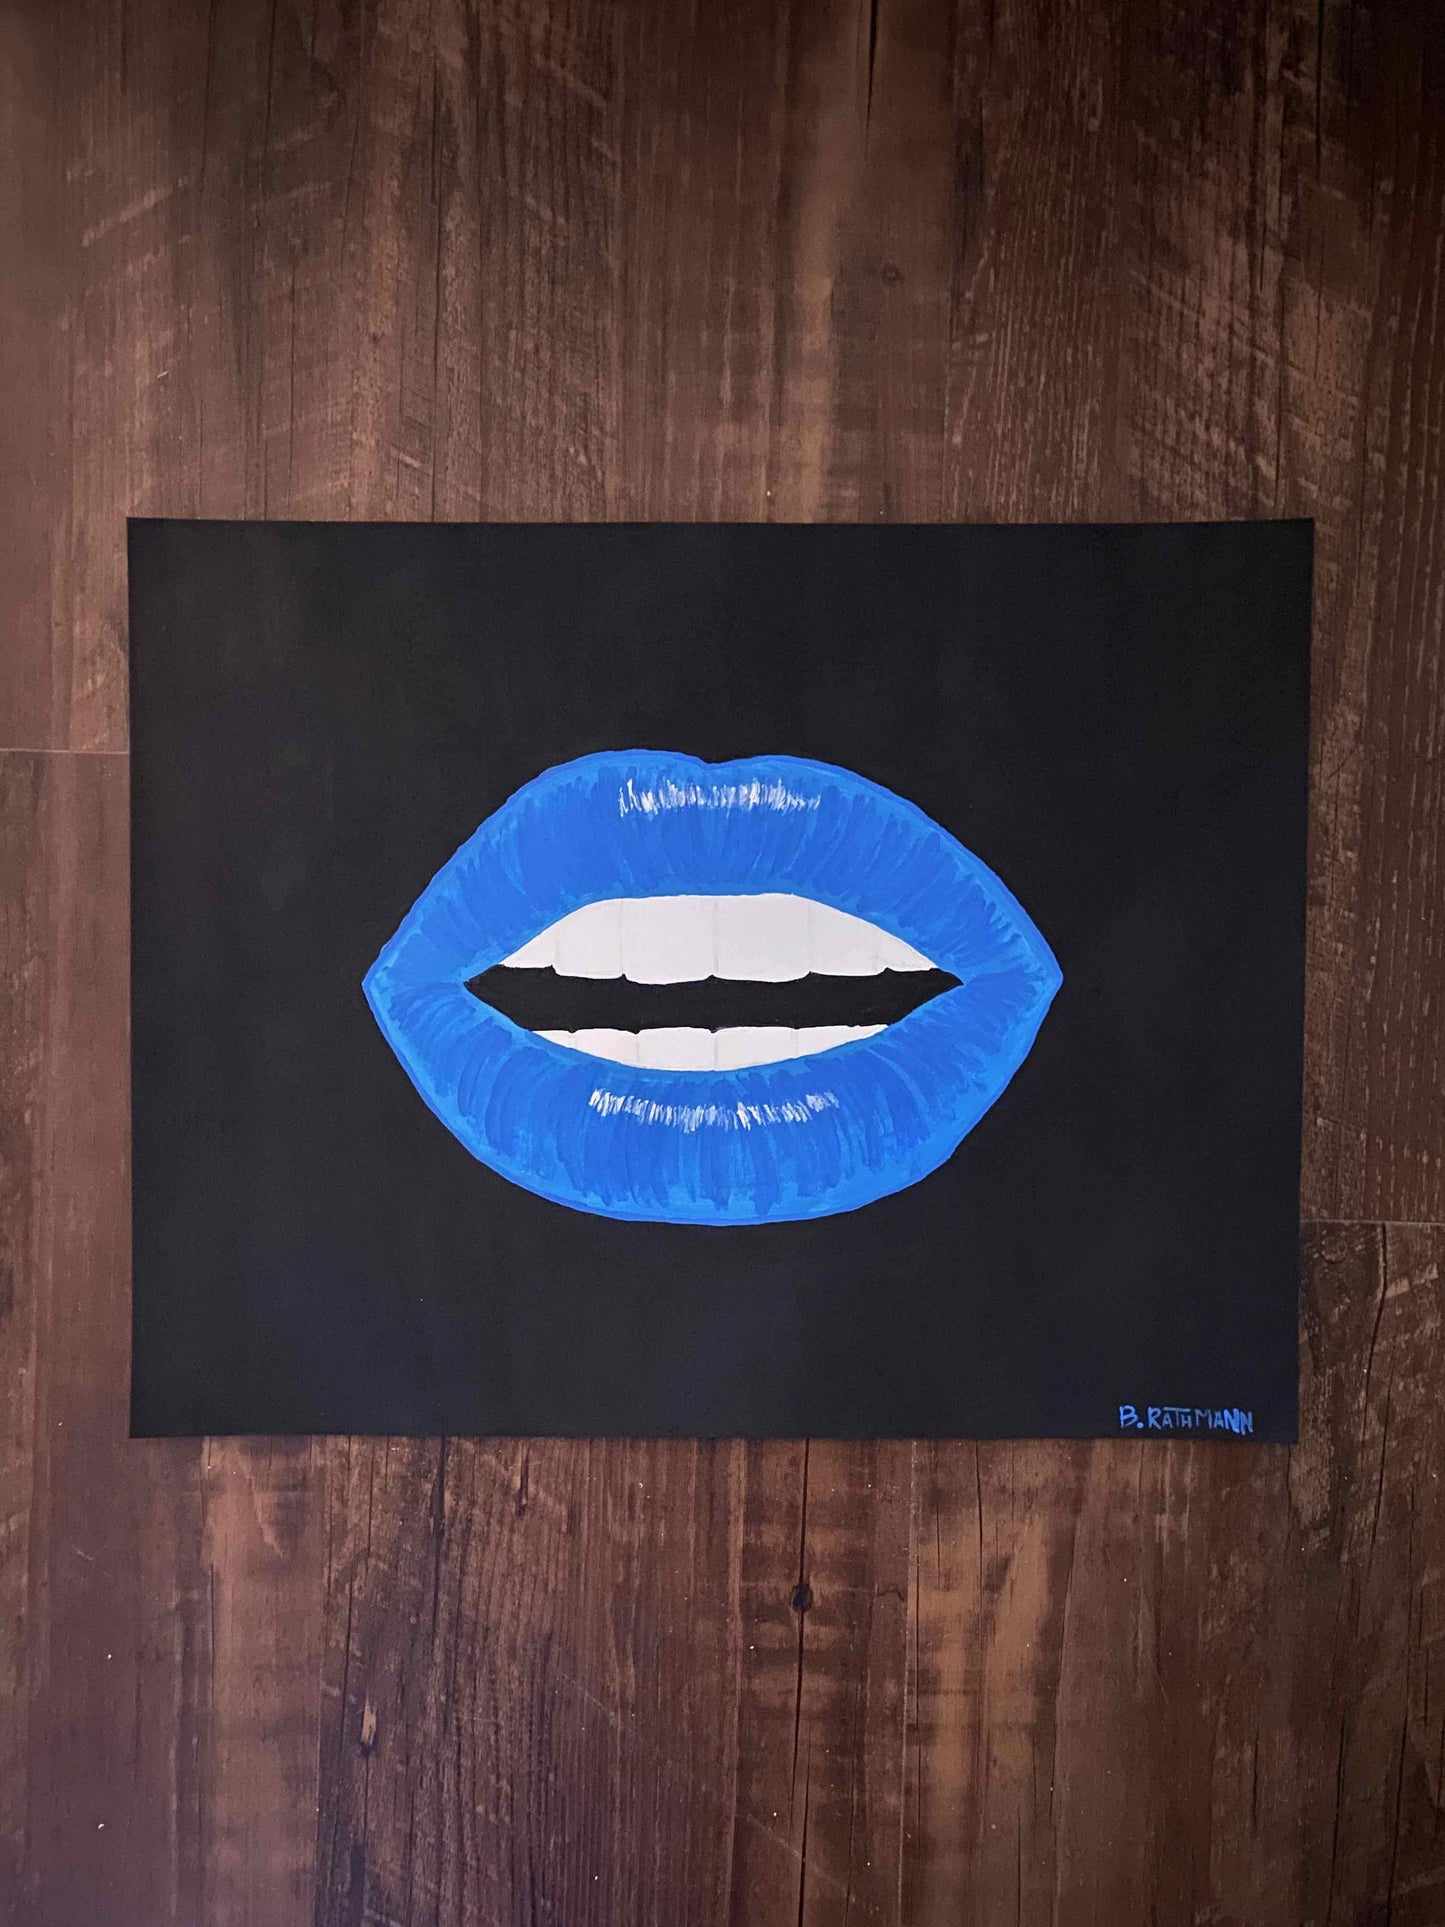 This is an original acrylic painting on heavy paper. The bright blue lips are centered on a black background.